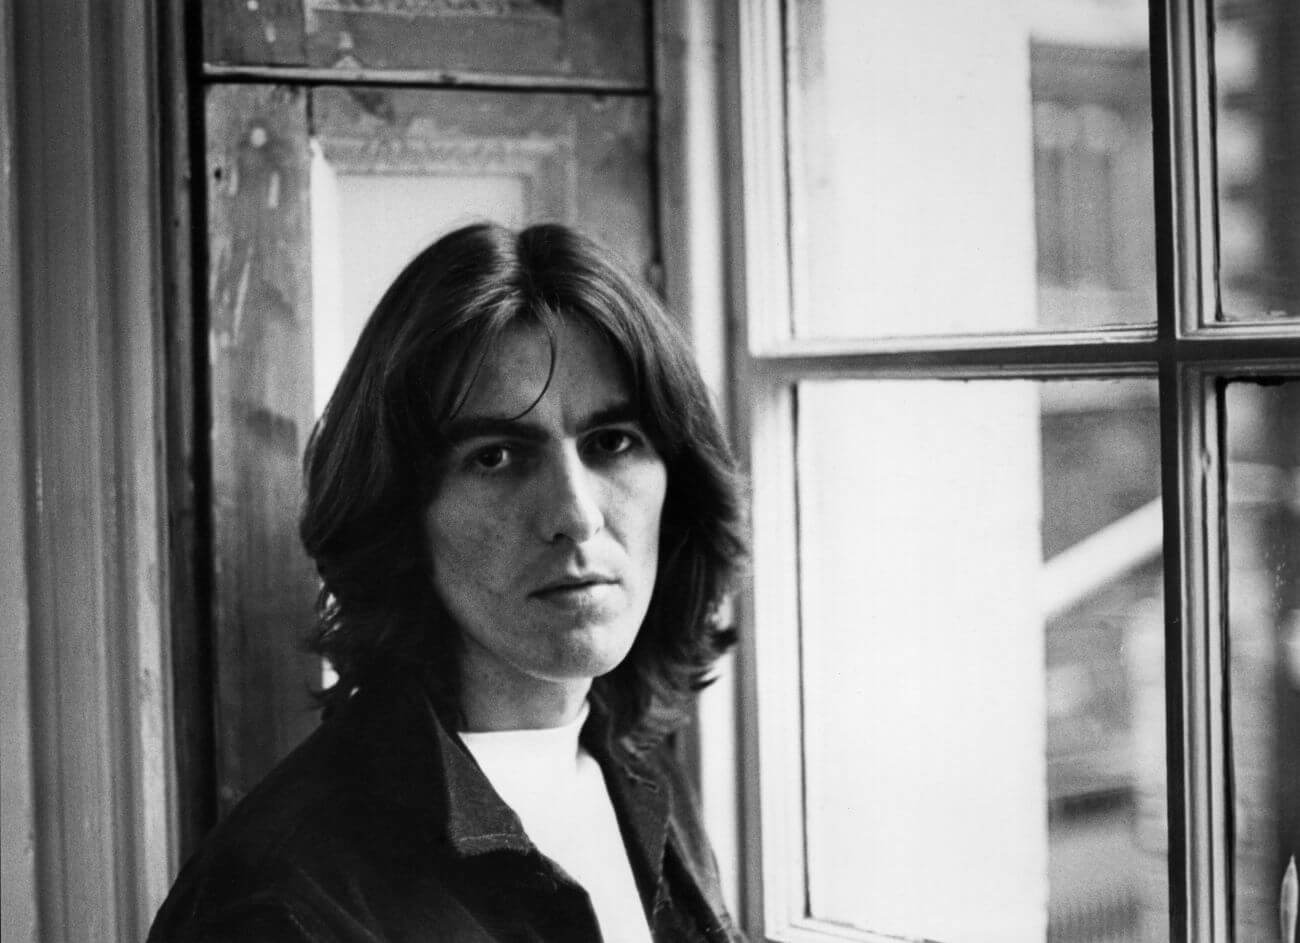 A black and white picture of Beatles guitarist George Harrison standing next to a window.